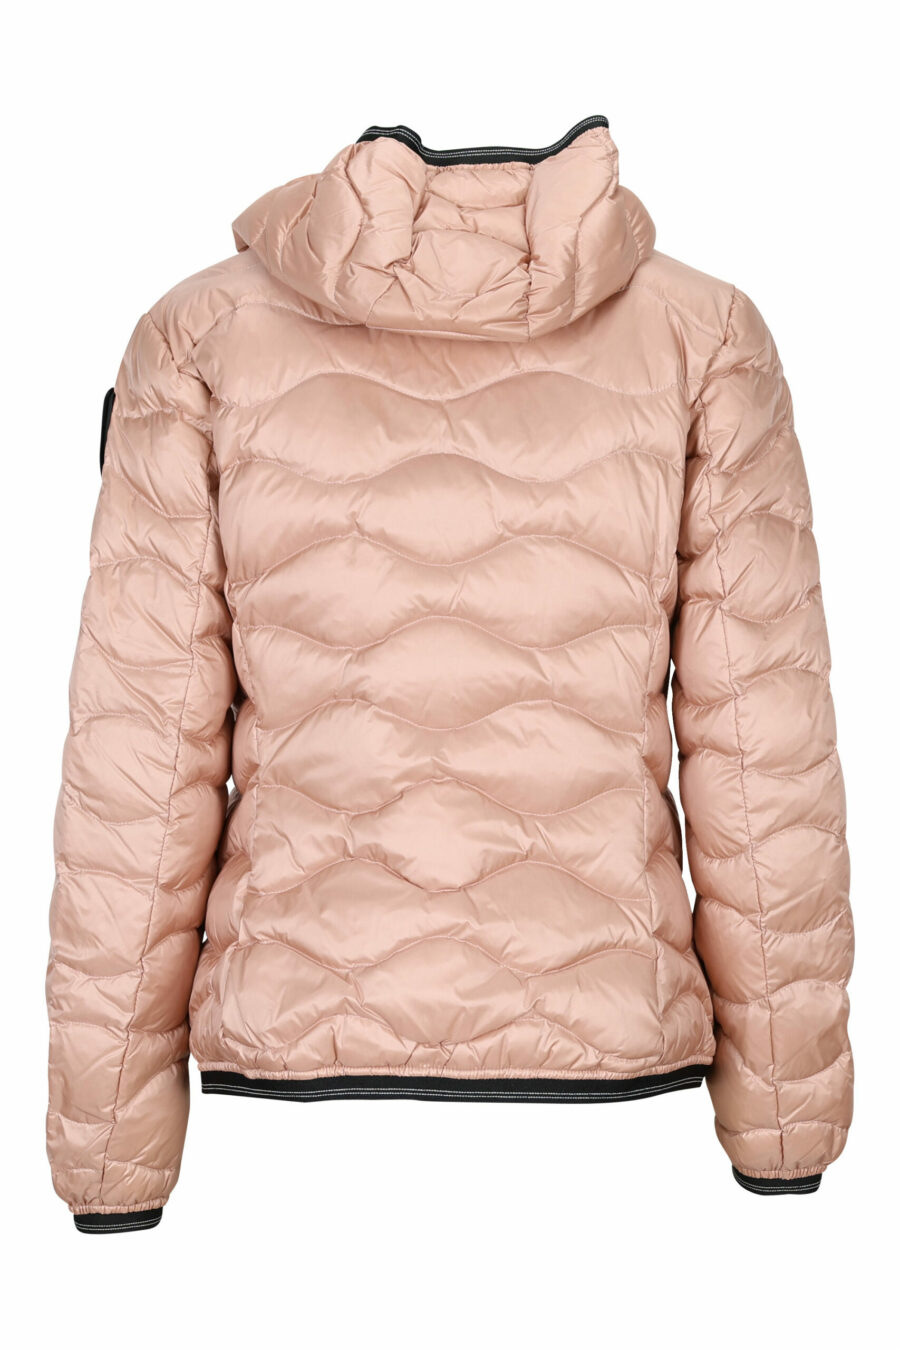 Pale pink hooded hoodie with wavy lines and logo patch - 8058610610487 2 scaled